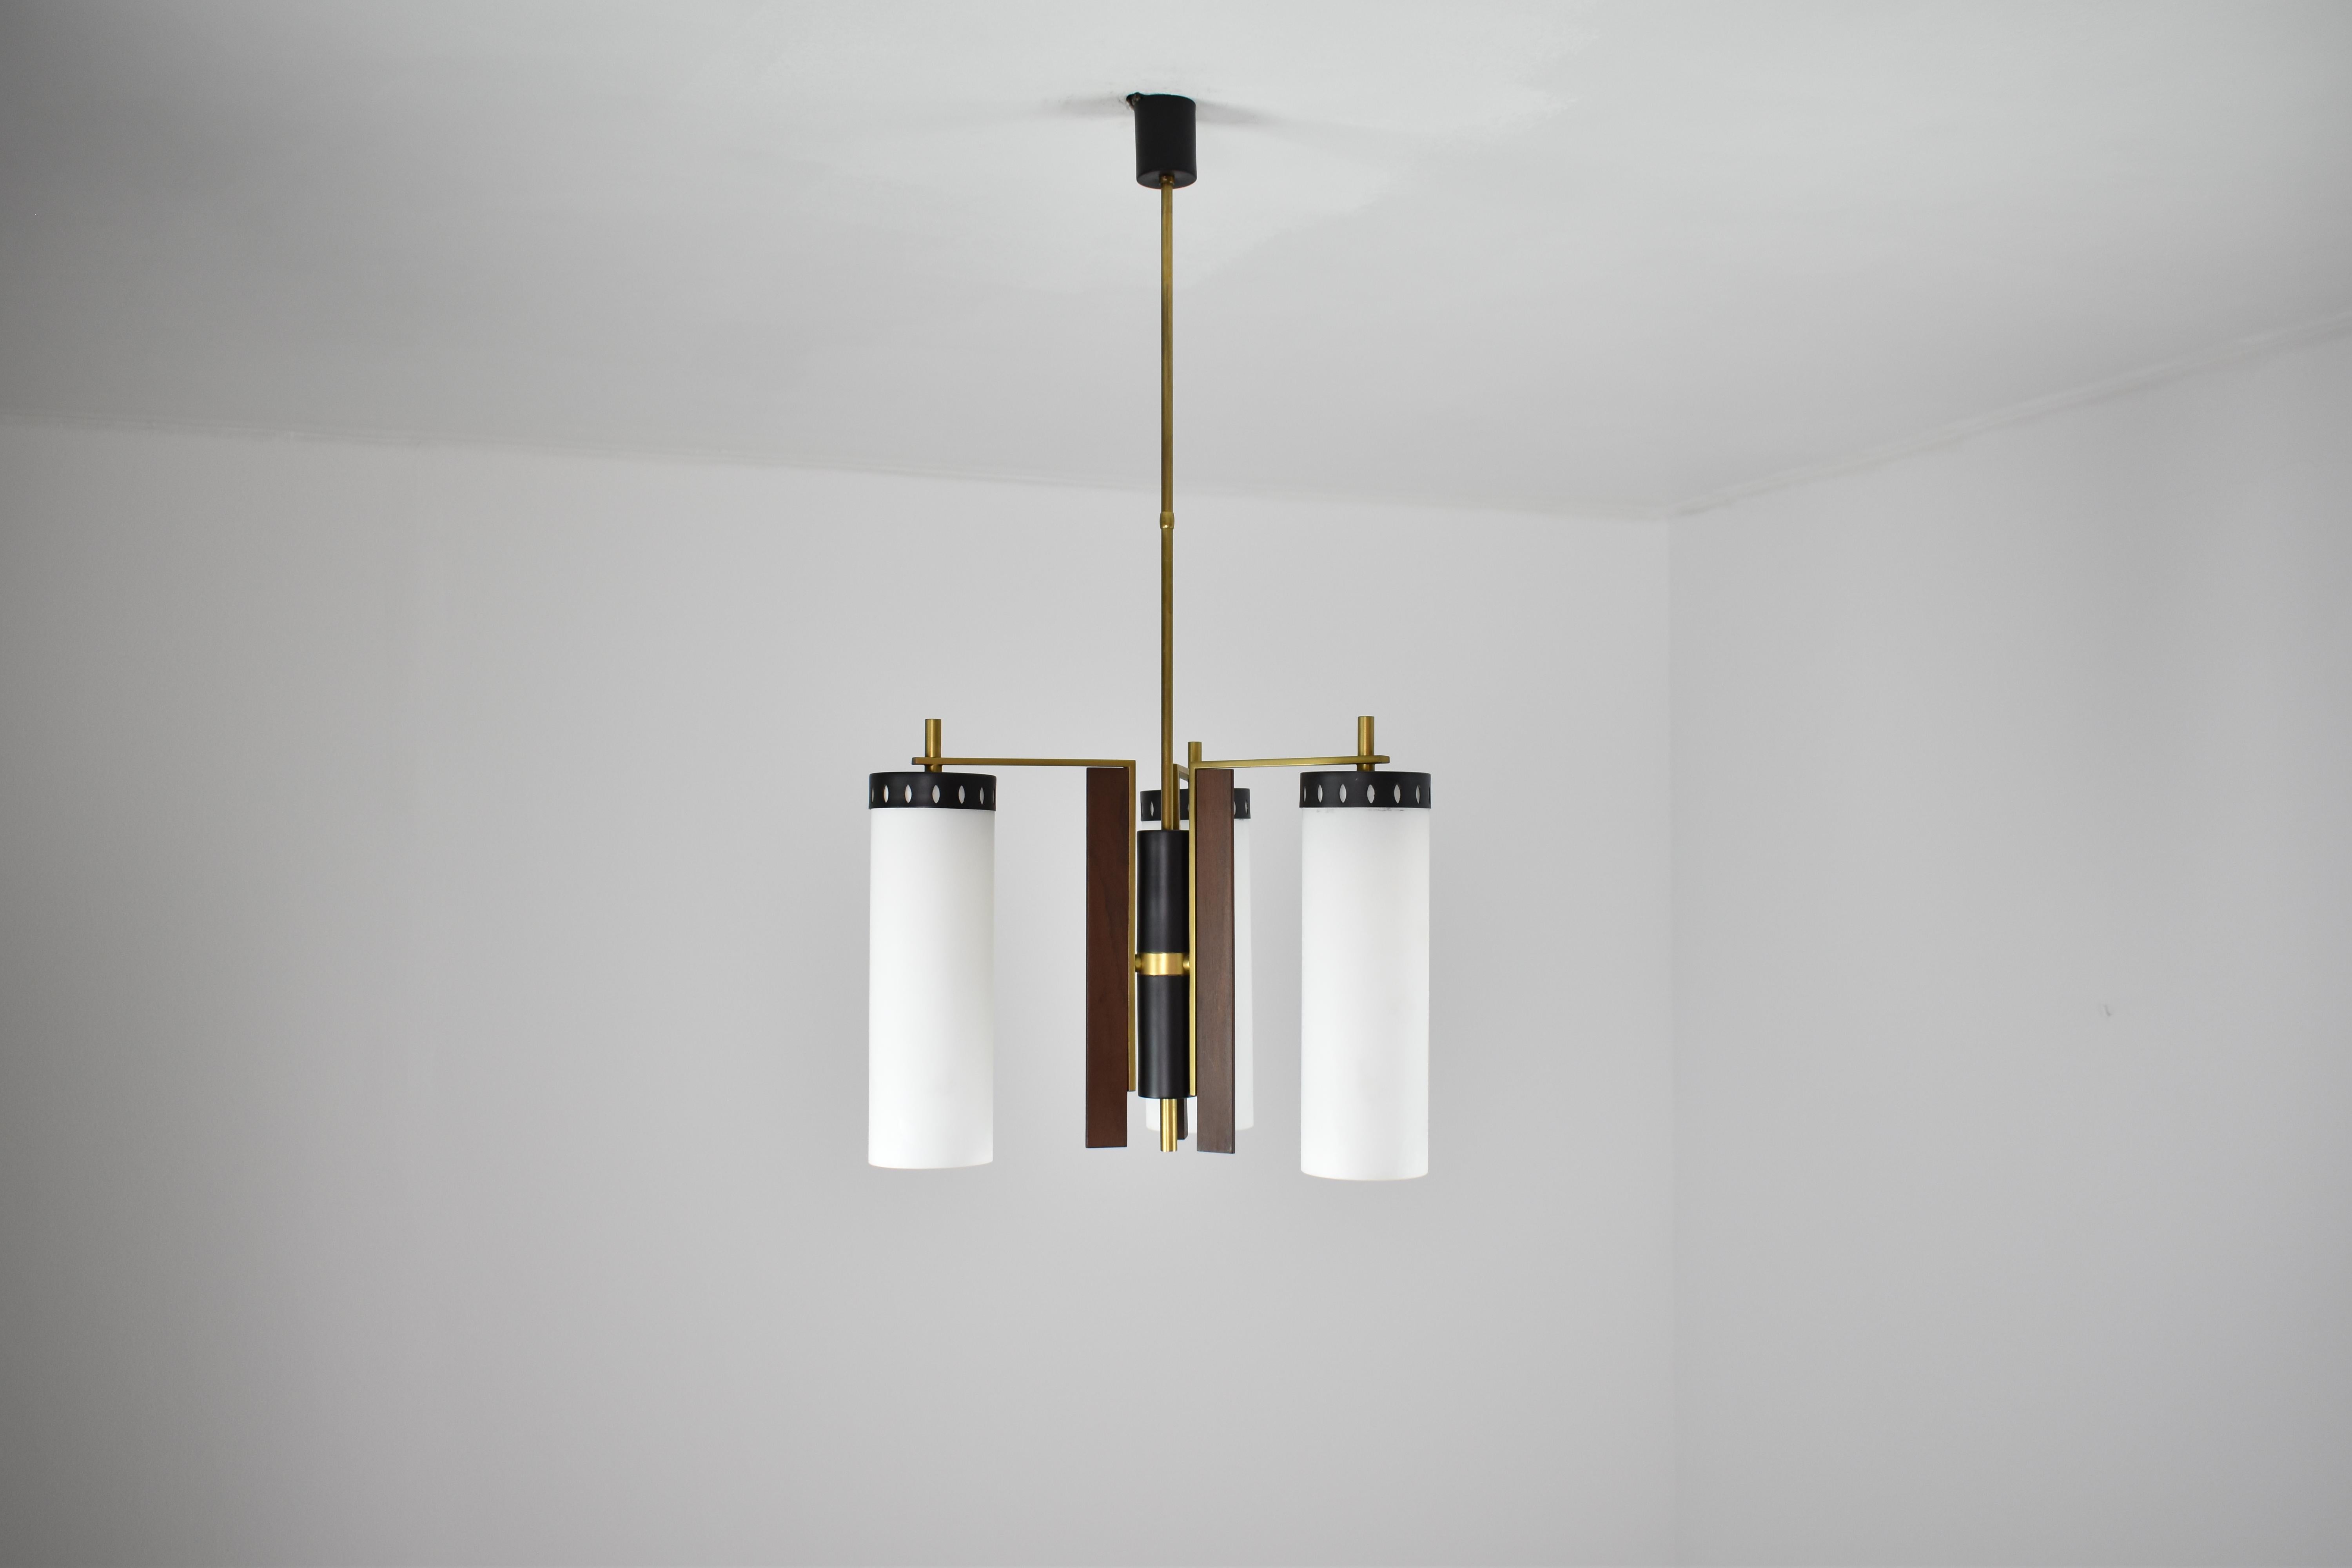 A beautiful 1960s Italian three-light pendant composed of long milk glass circular structures attached with black steel perforated sheets. The sophisticated structure is designed of brass, wooden panels and steel. 
The warmth of wood, the